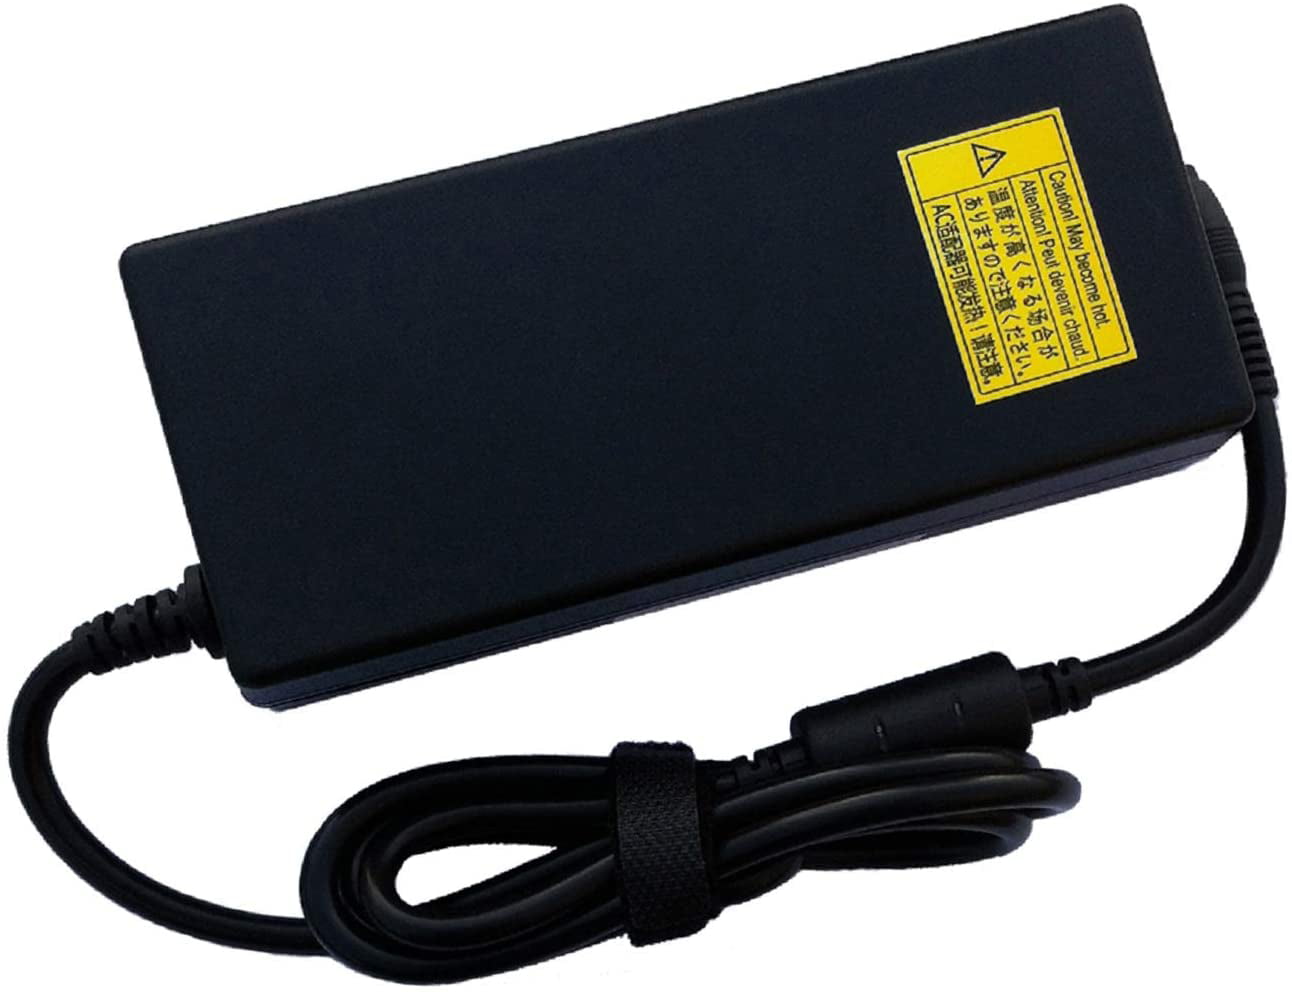 Gepe Model 809002 Pro AC Adapter Old Stock for sale online 